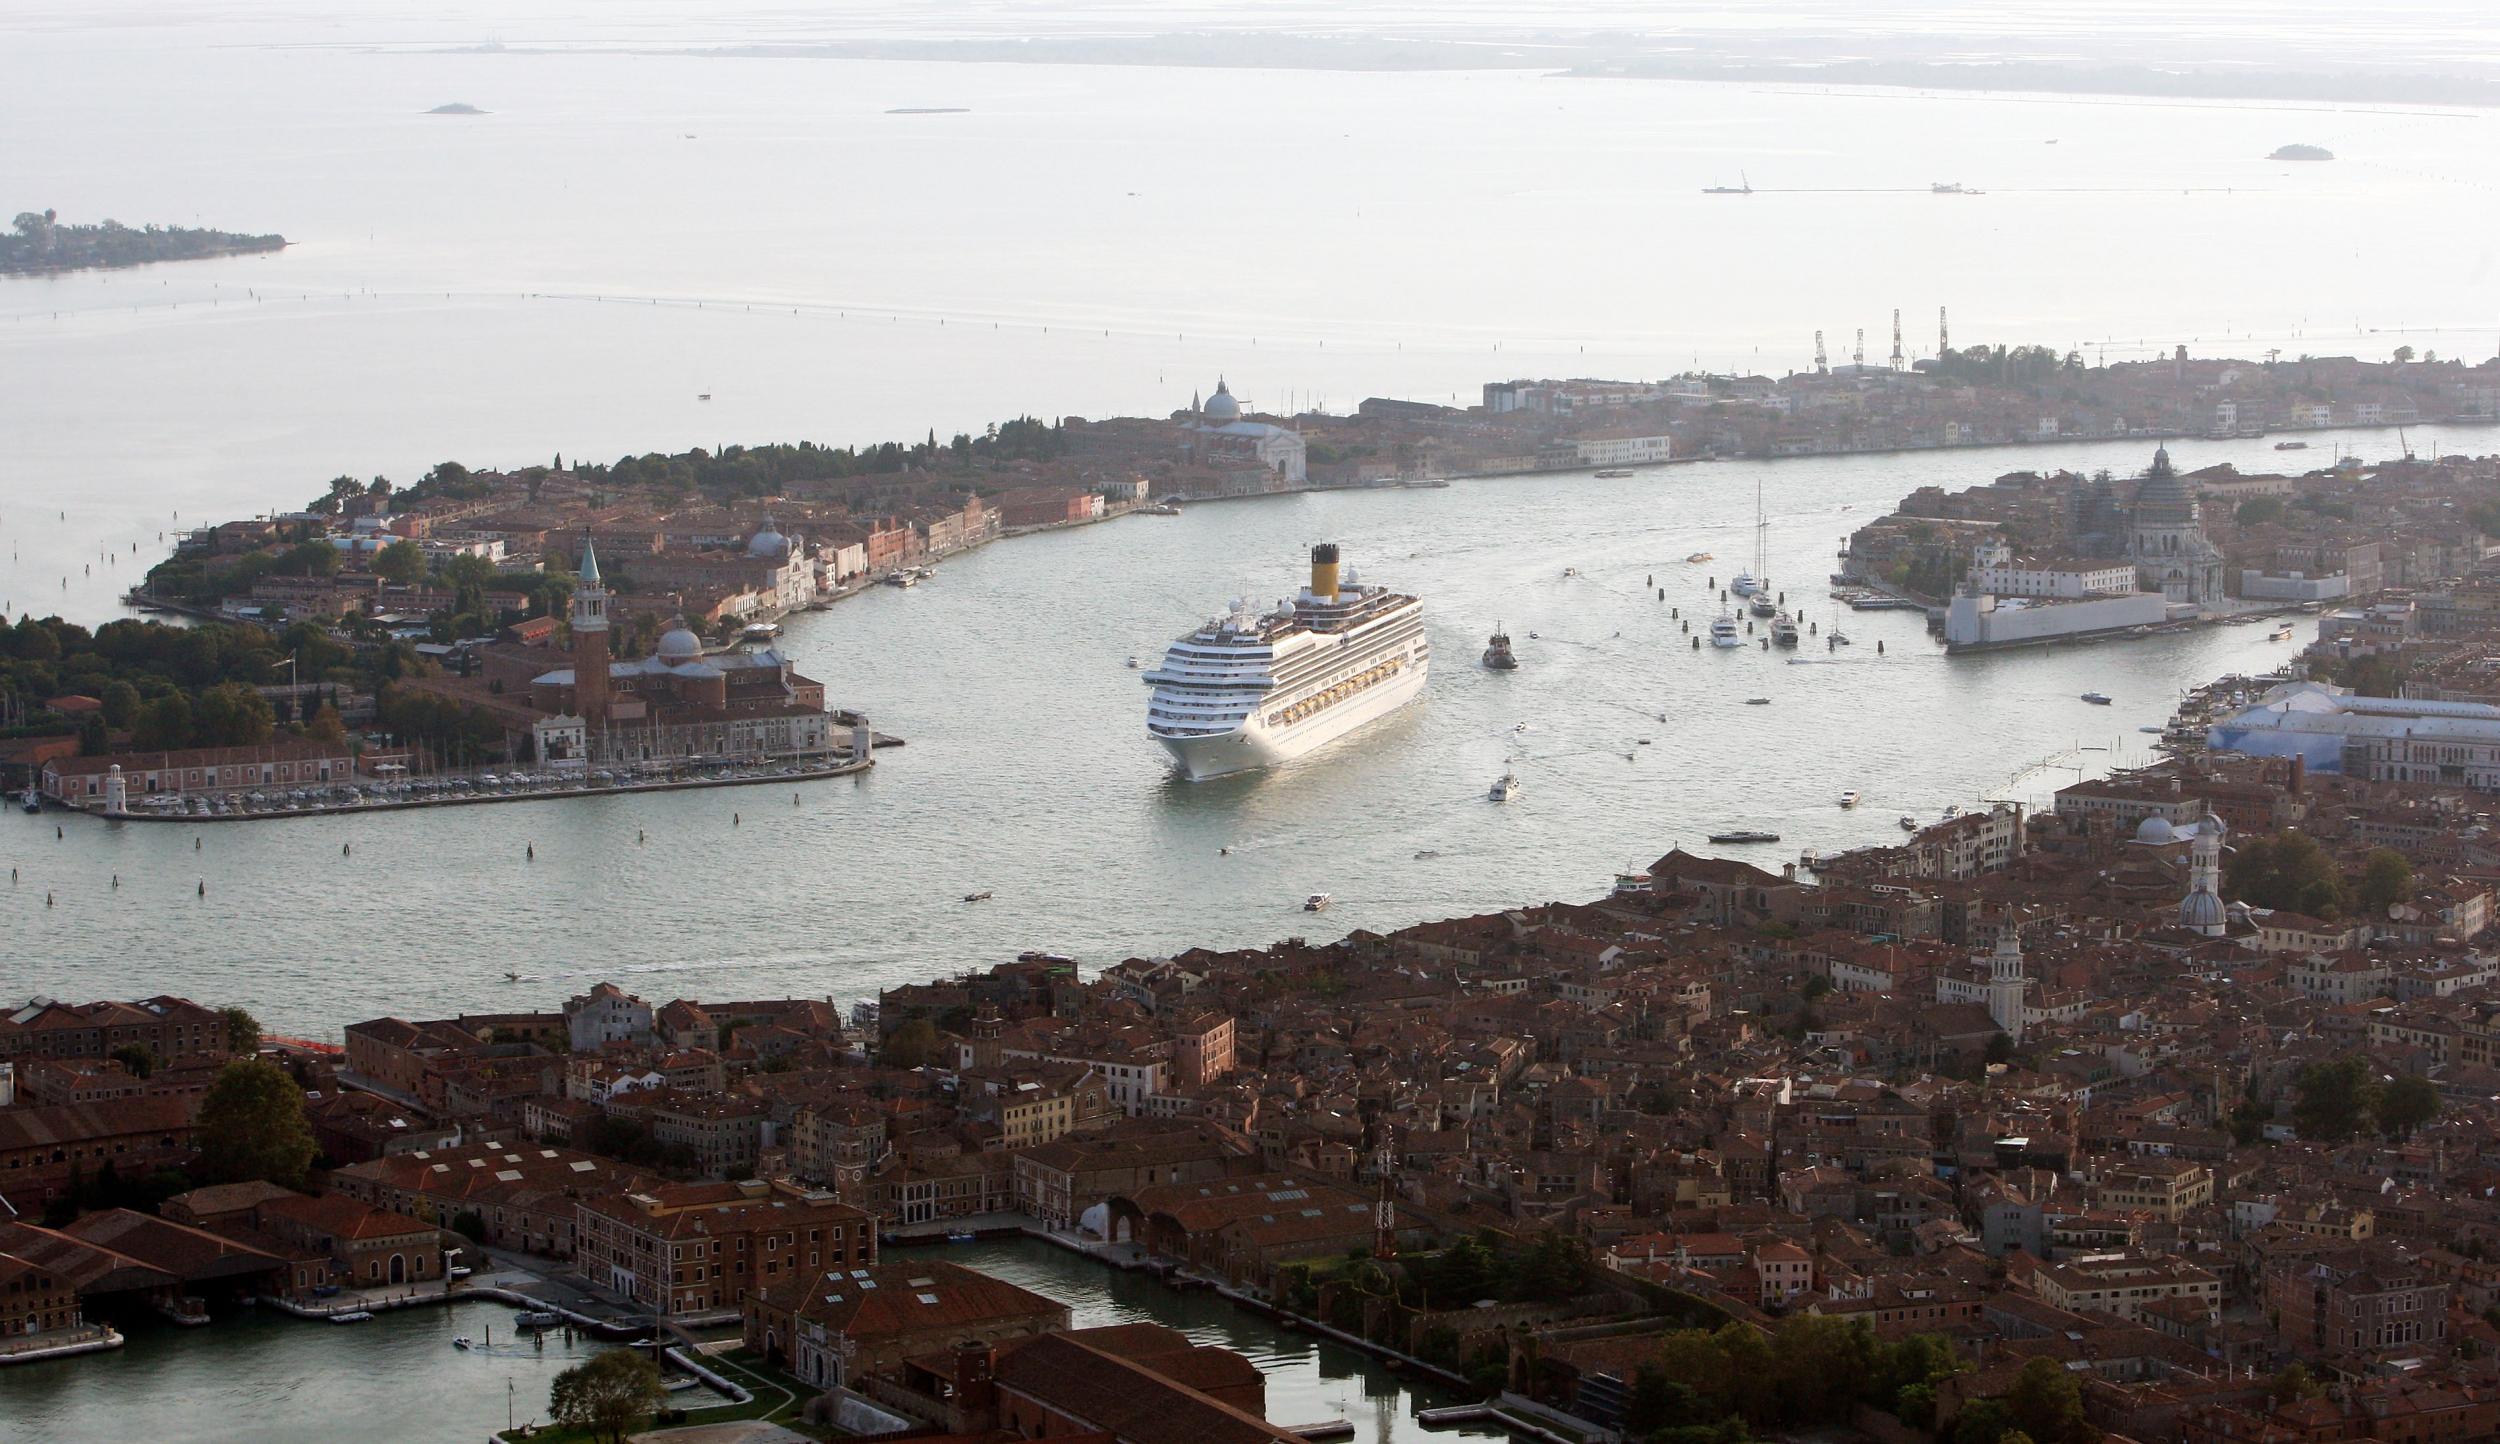 You’ll spend much of day two on Giudecca, the island on the left, where locals still live